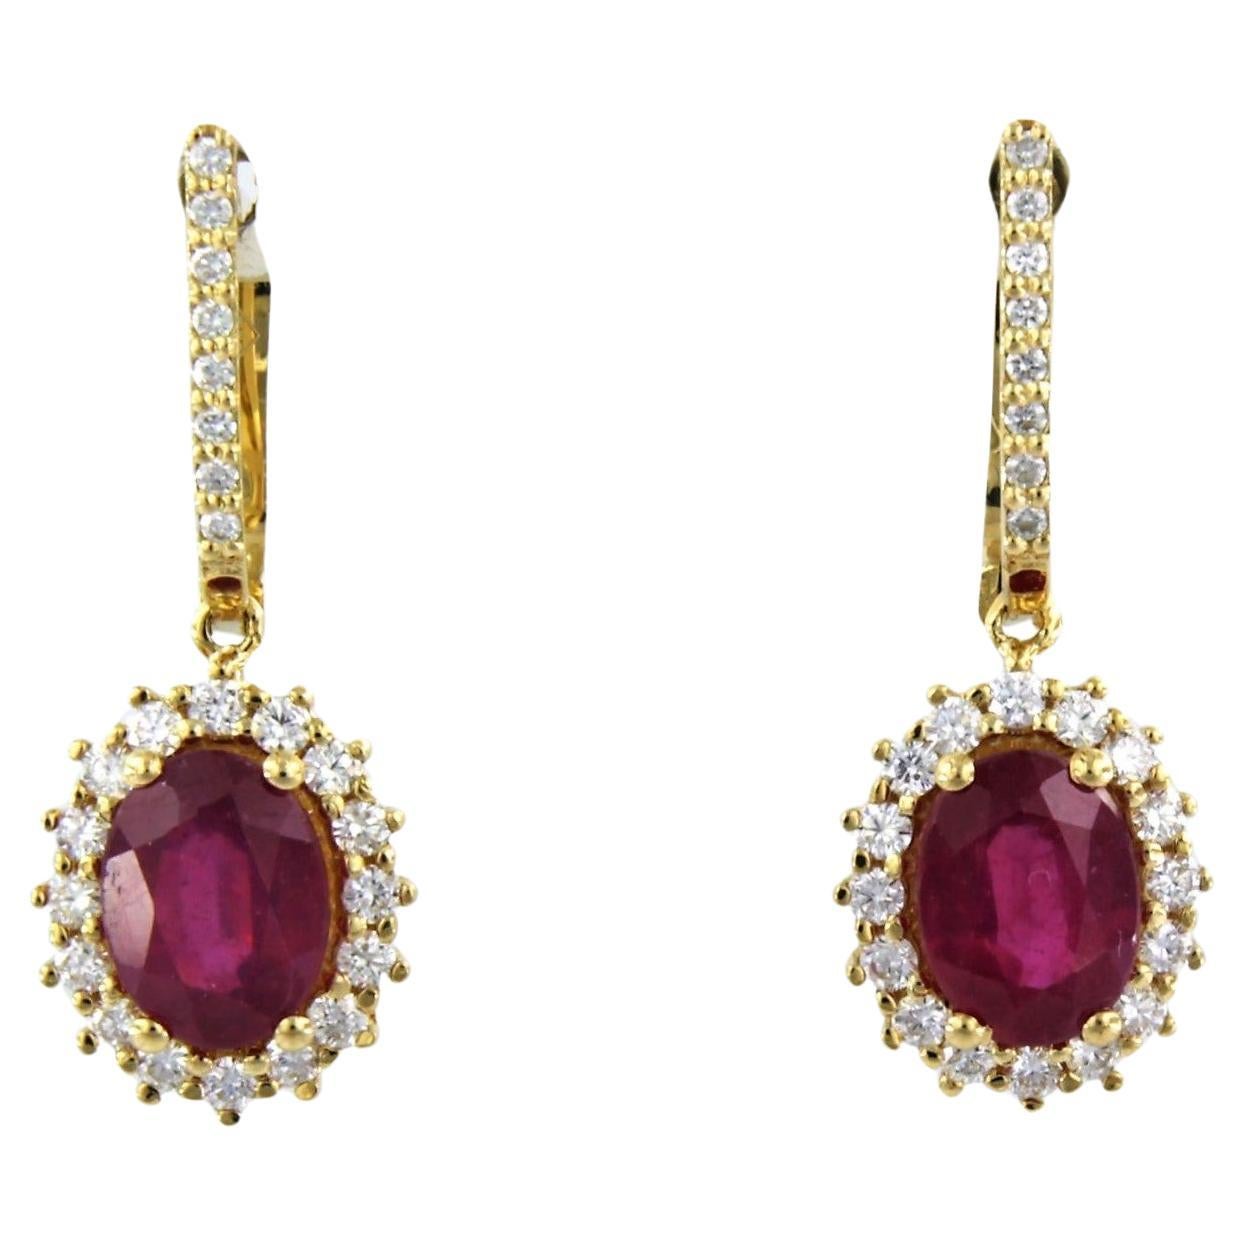 18k gold earrings with ruby to. 3.40ct and brilliant cut diamonds up to.0.64ct For Sale